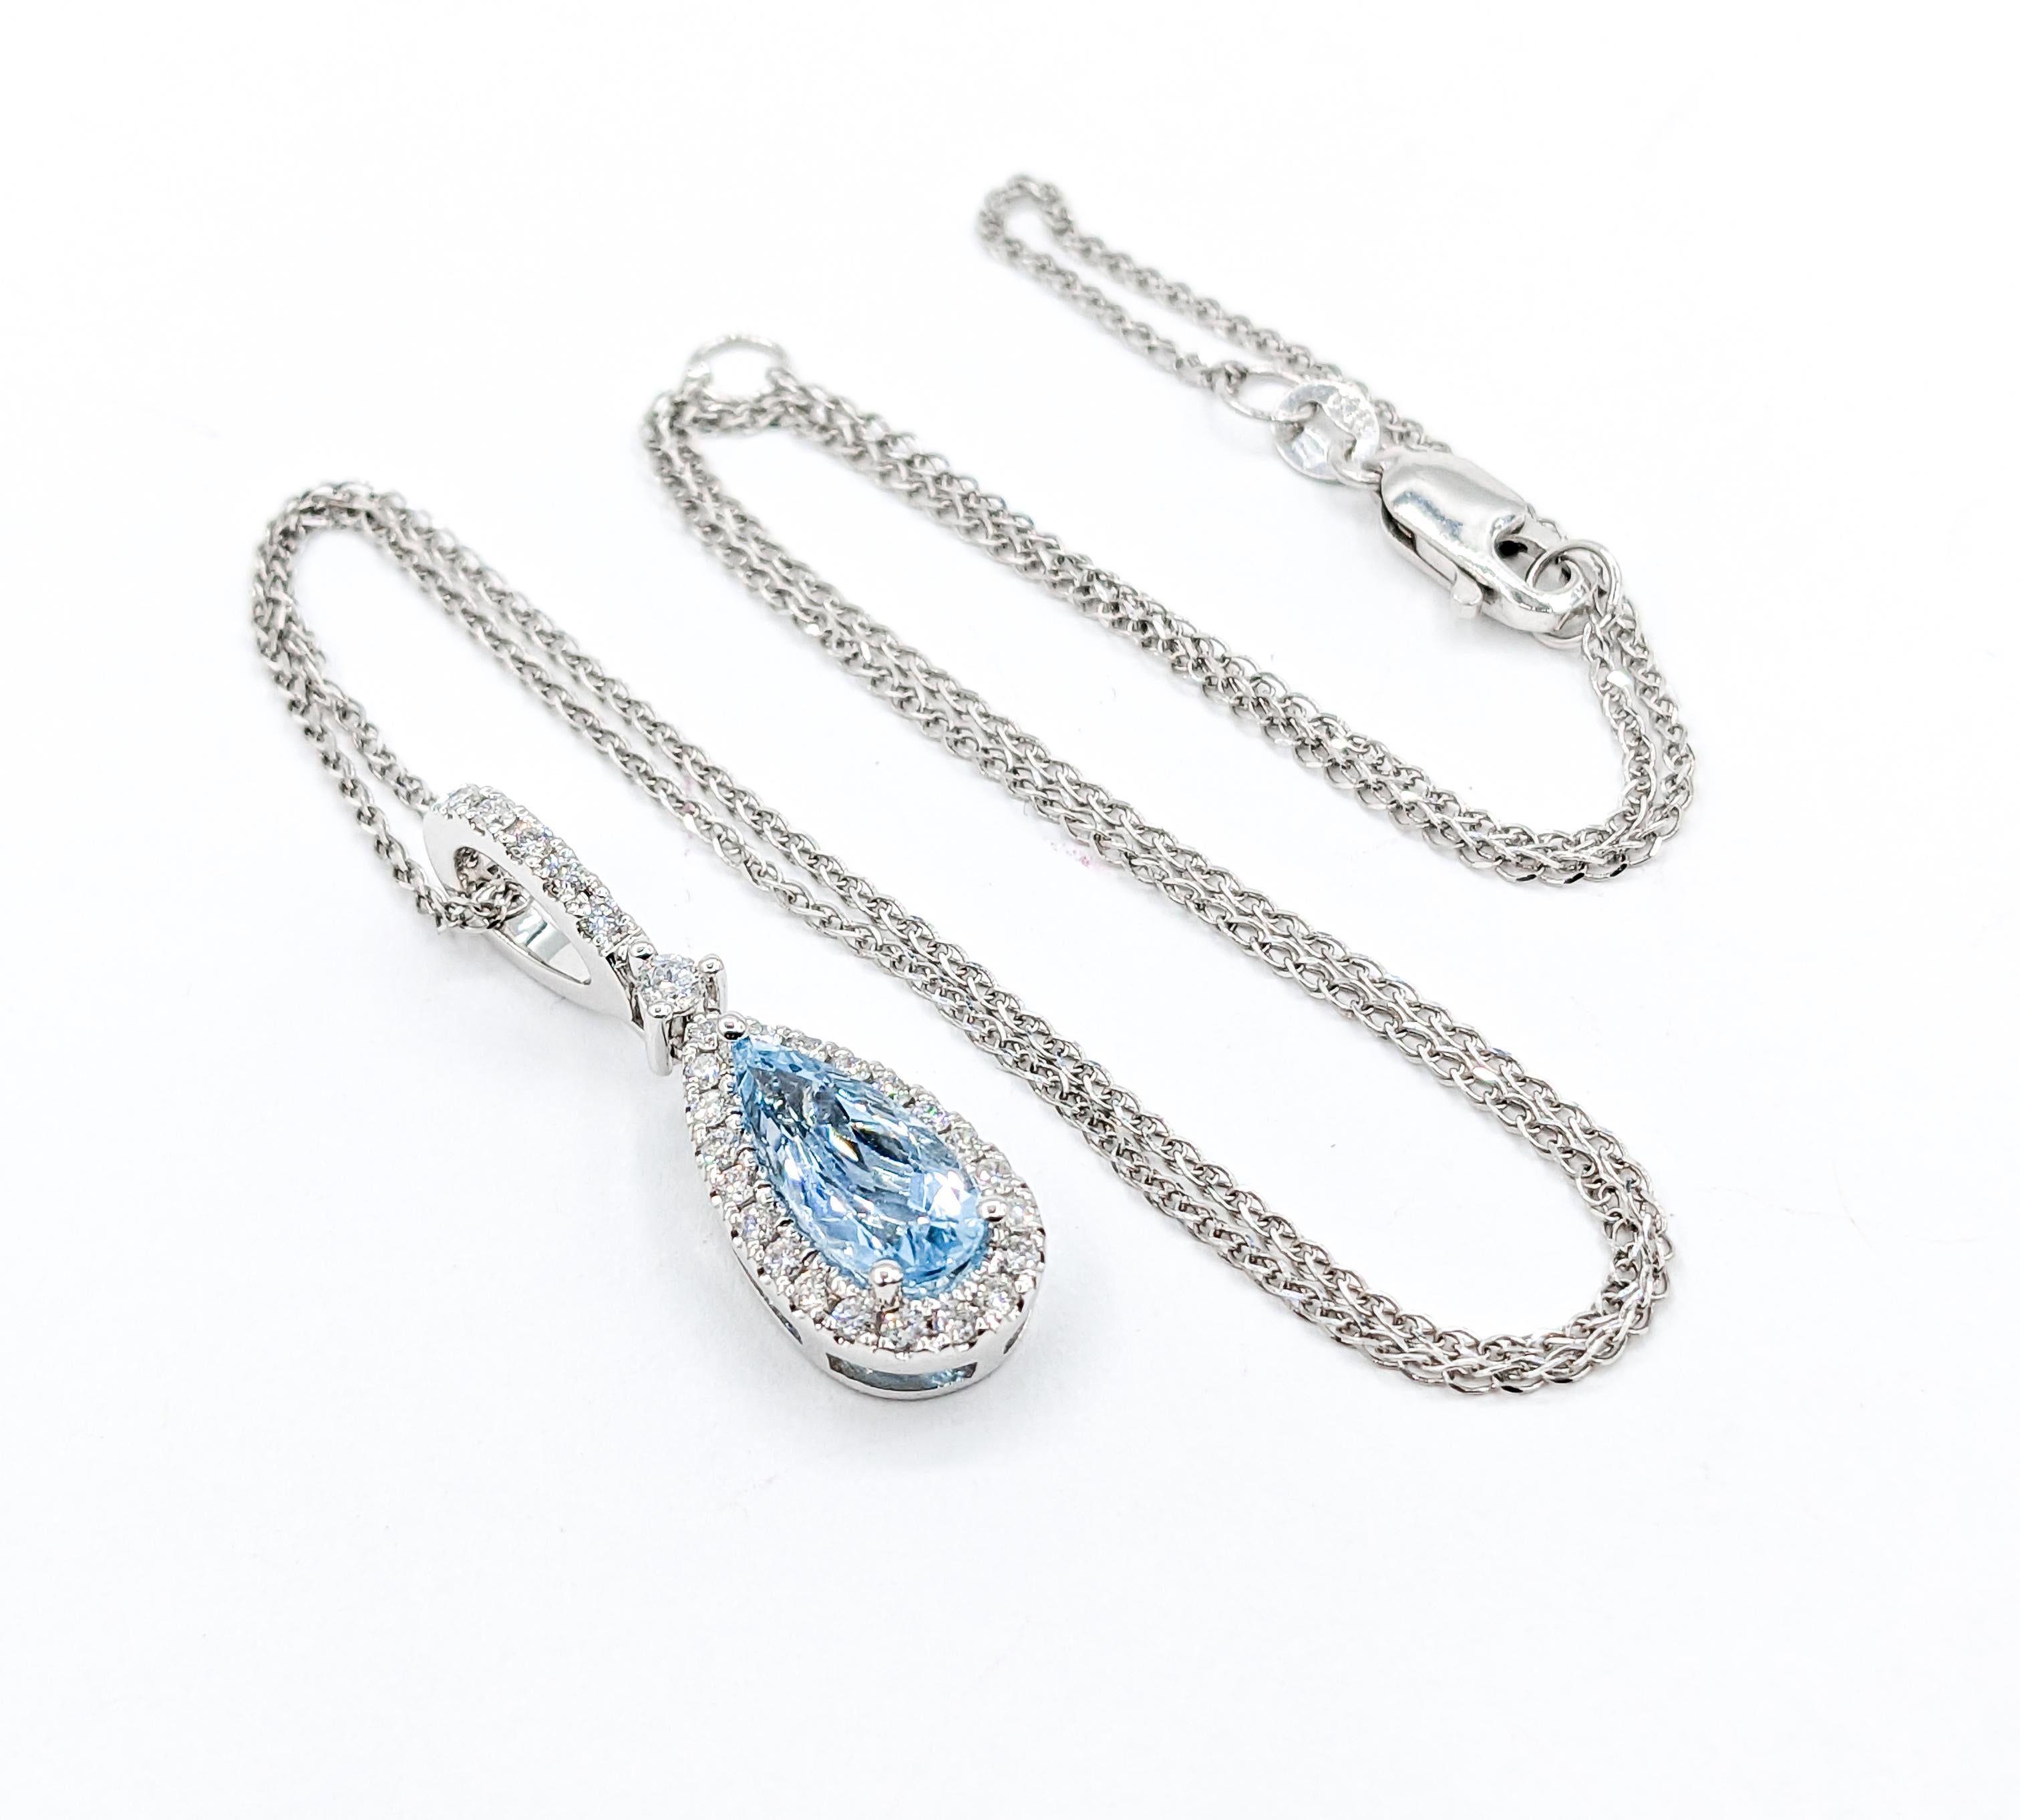 Natural 1.28ct Aquamarine & Diamond Pendant White Gold

Presenting a stunning pendant, meticulously crafted in 14kt white gold, adorned with 0.30ctw of glistening diamonds. These diamonds, with I clarity and near colorless appearance, provide an